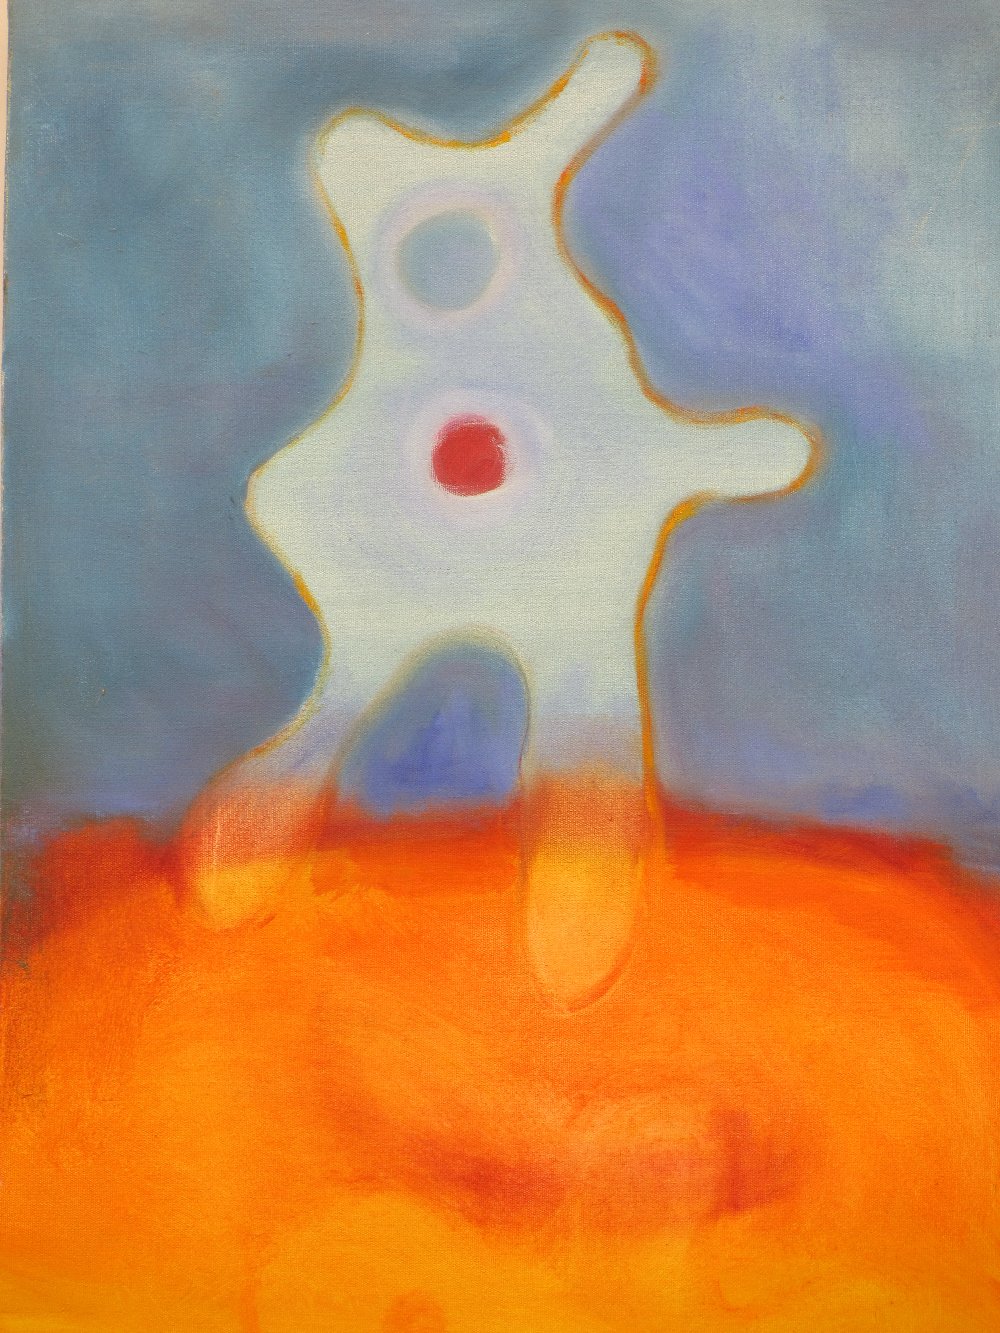 MARJORIE STODDARD large abstract oil on canvas - entitled 'Glow' on label with original price, 92 - Image 4 of 4